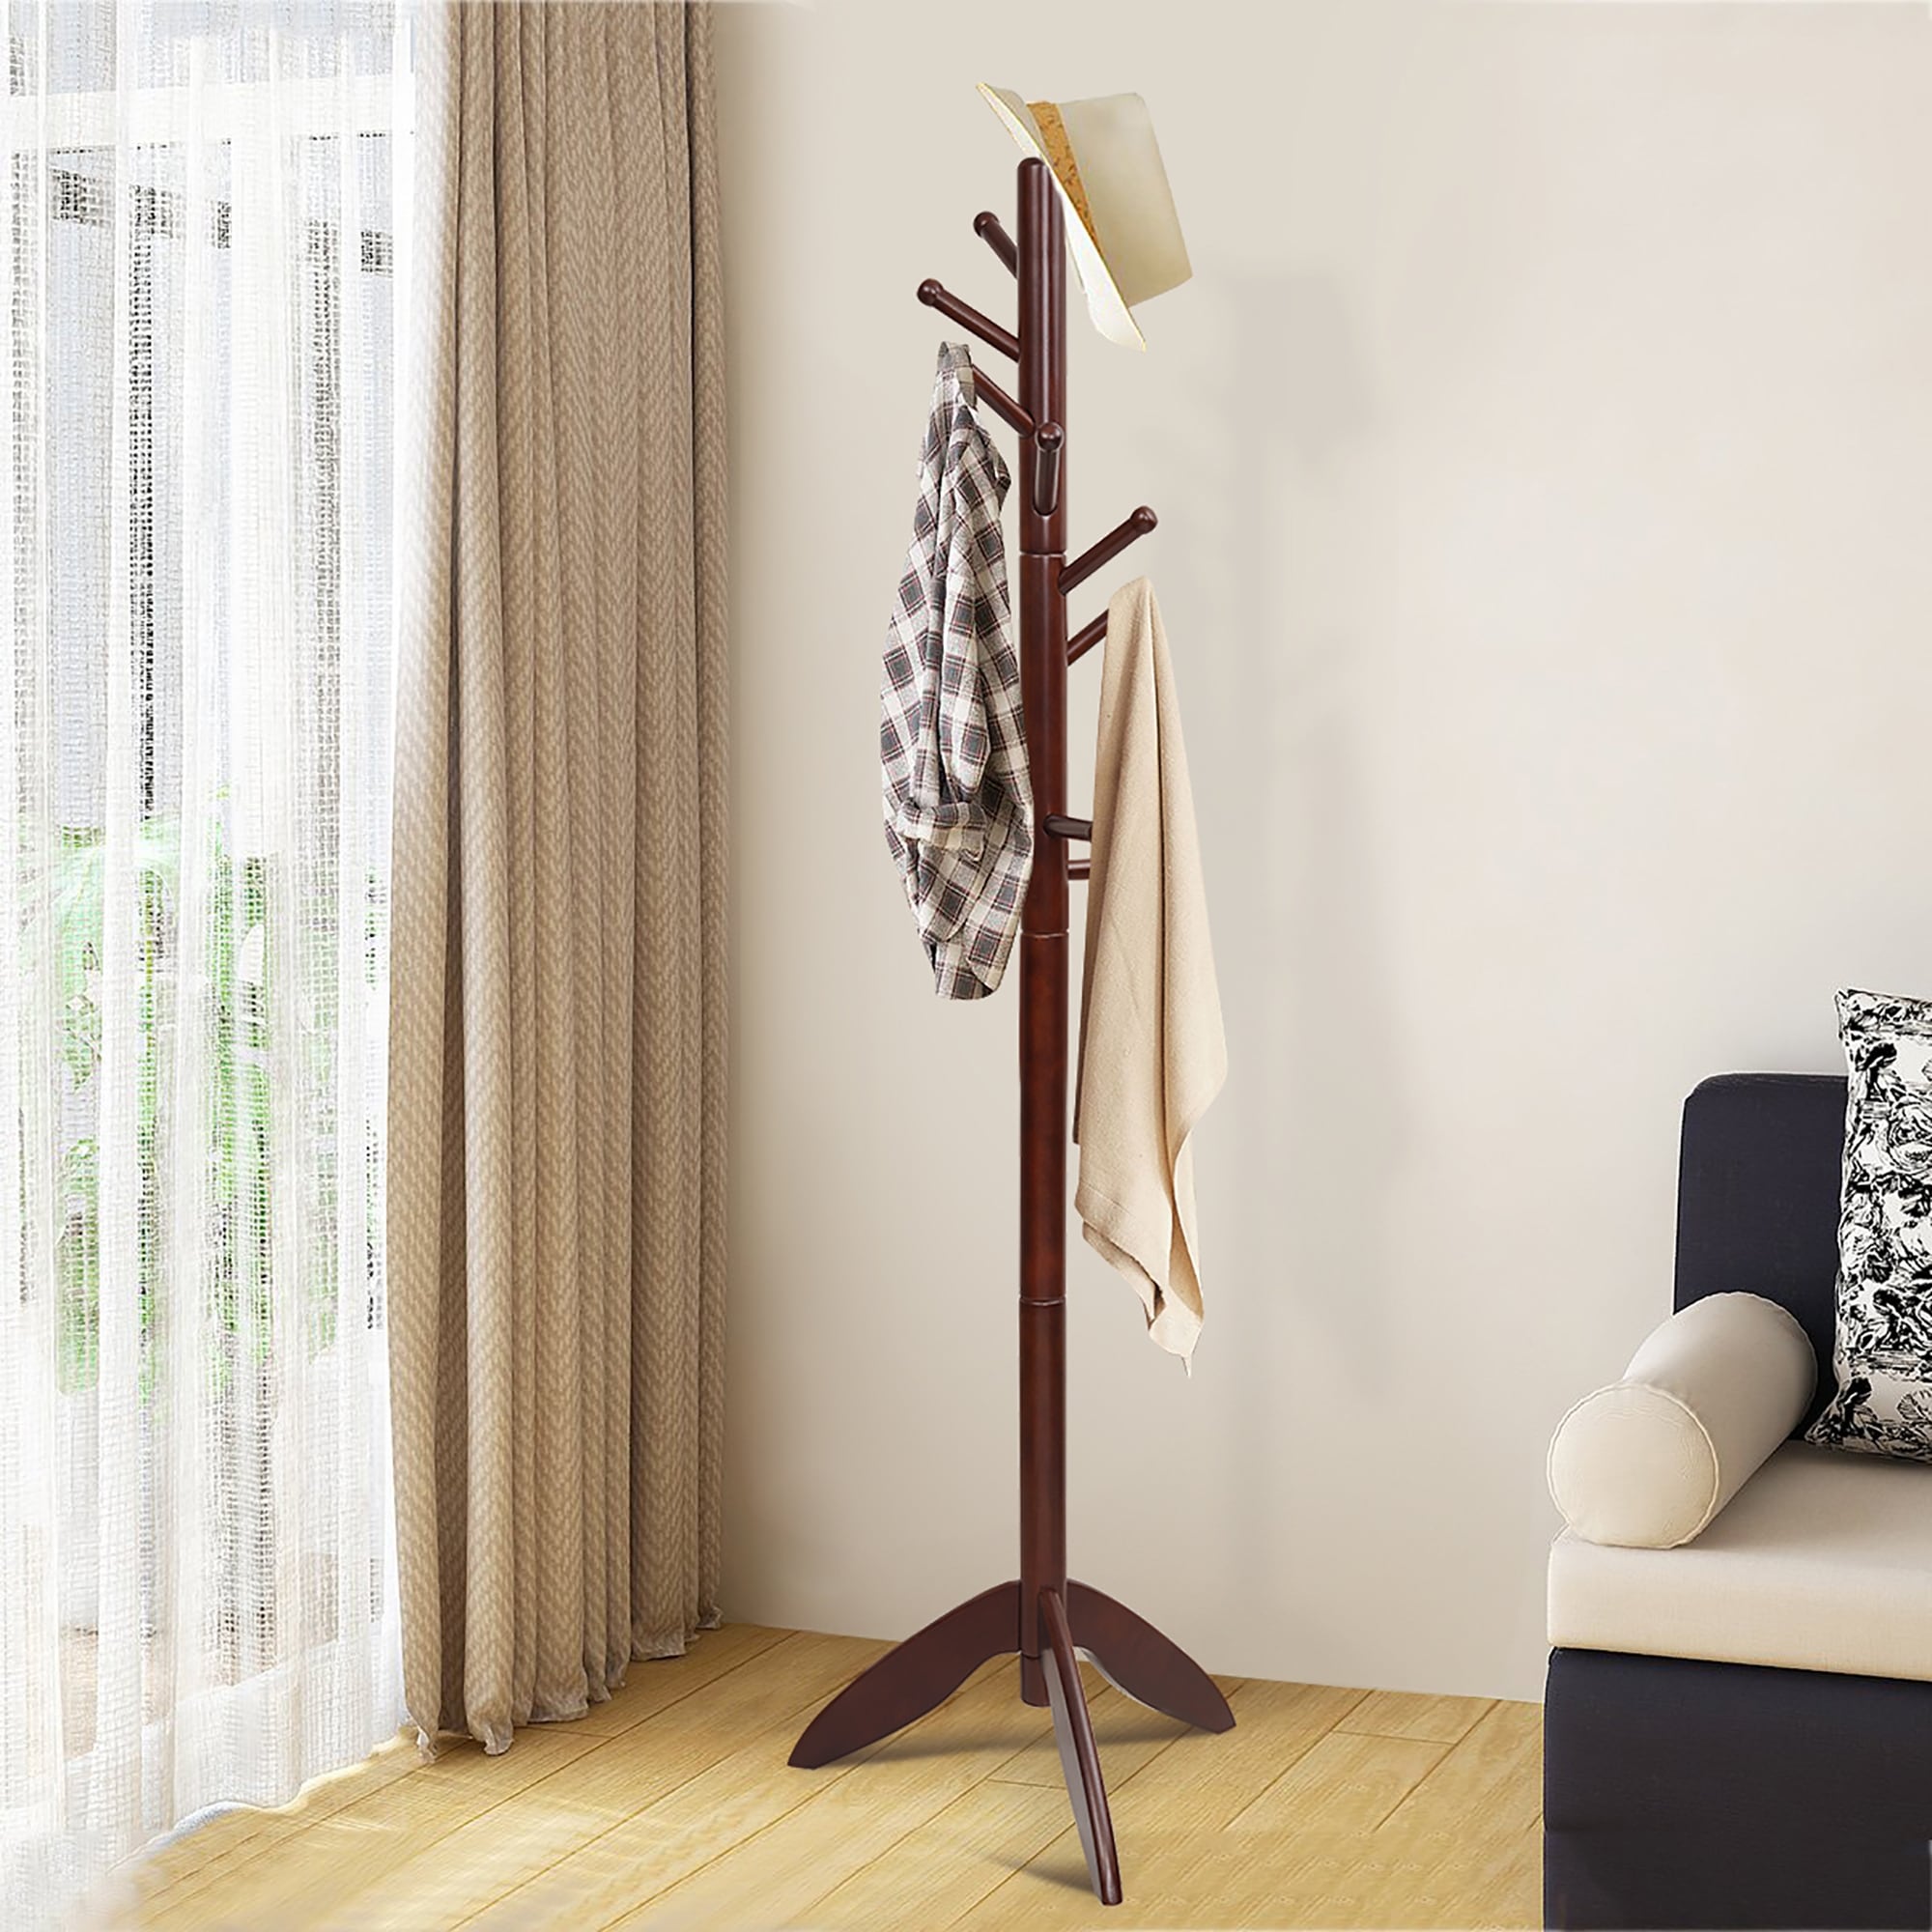 https://ak1.ostkcdn.com/images/products/is/images/direct/12f32b3c89dd0be190bebaedb302dd6294d7ef15/Wood-Tree-Coat-Rack-Freestanding-Coat-Stand-with-11-Hooks-Stable-Base.jpg